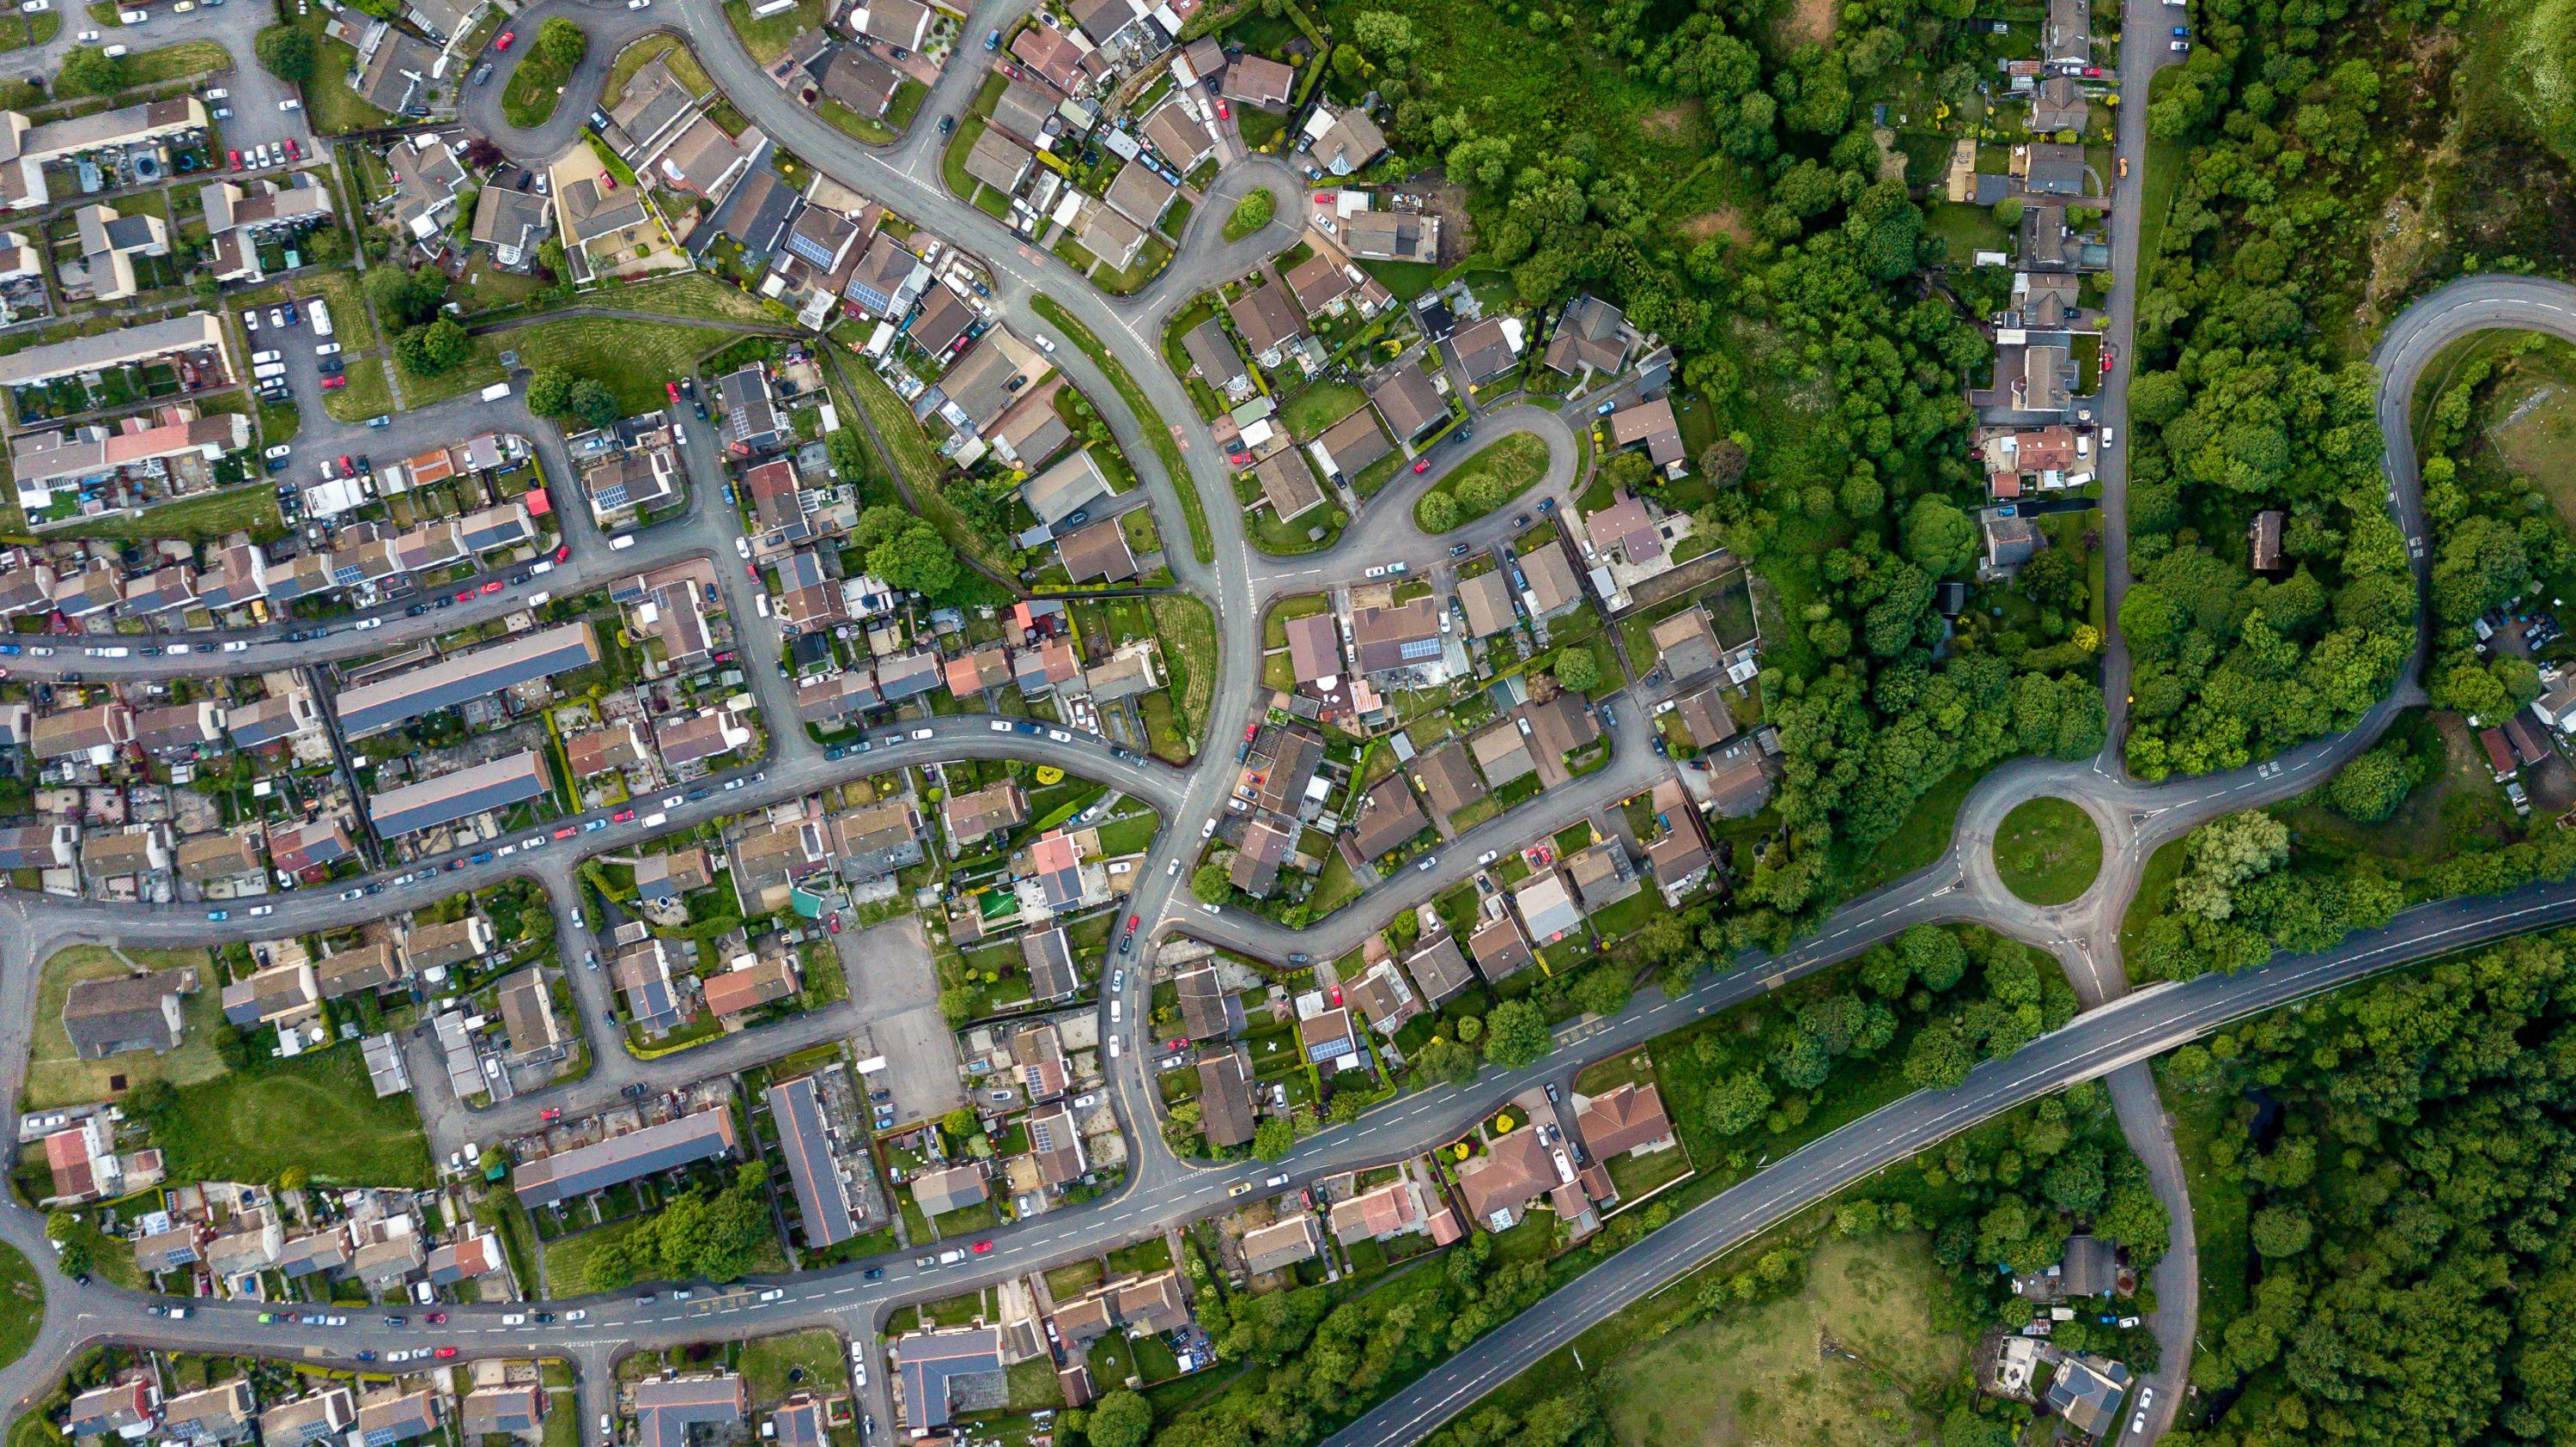 Aerial view of housing in Wales